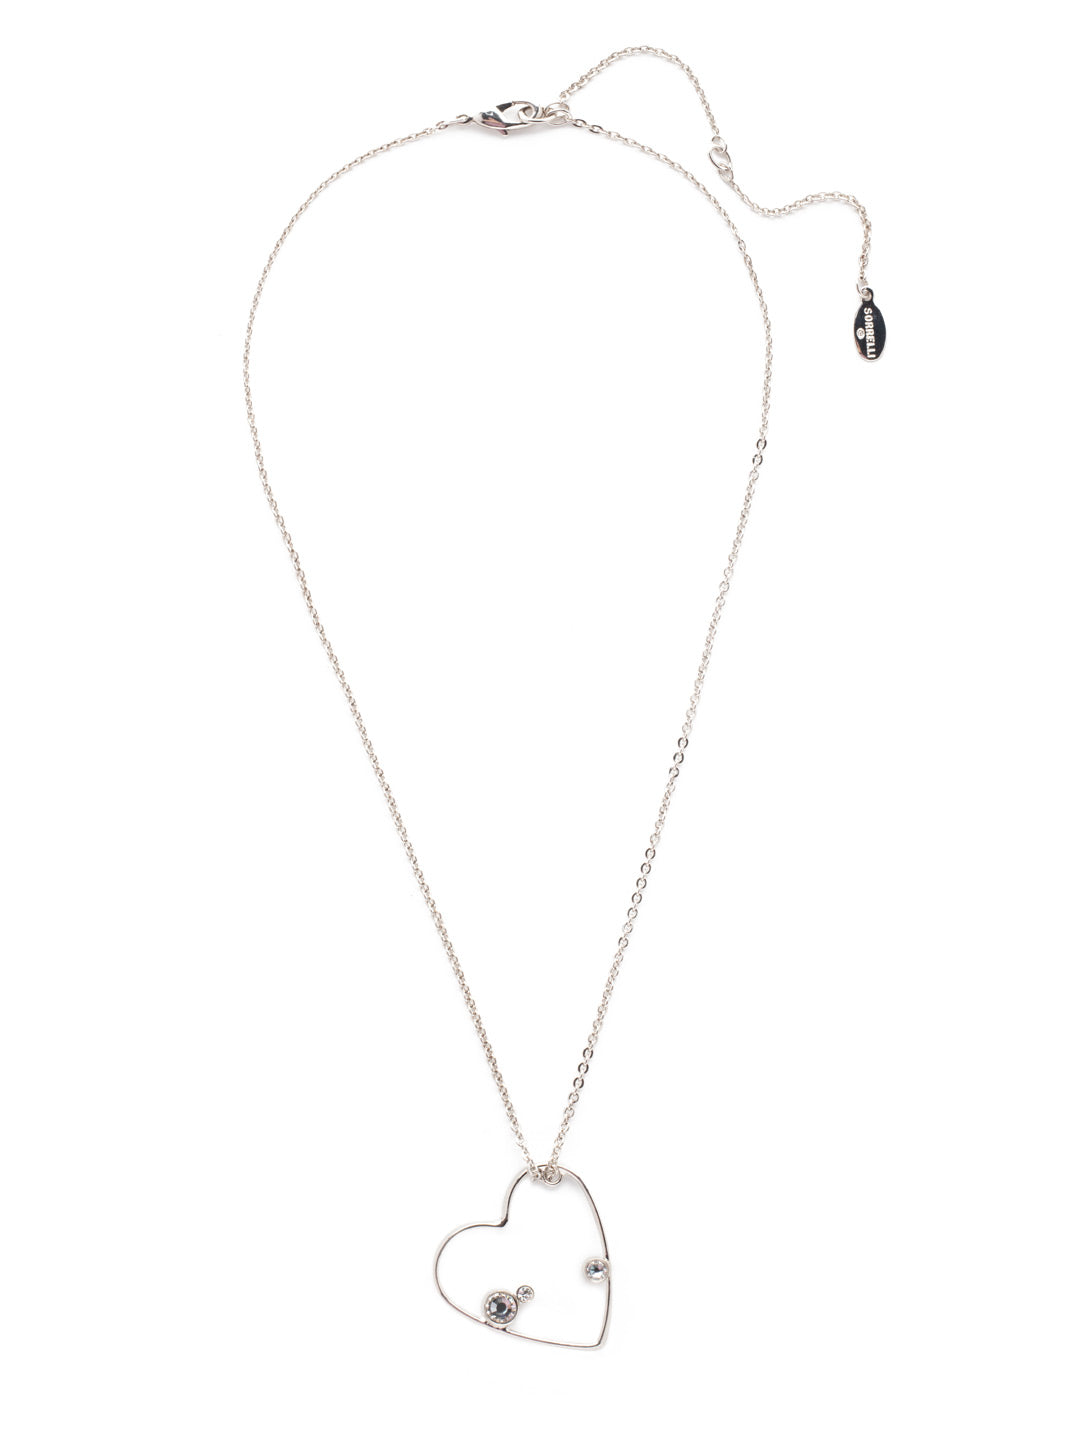 Love Pendant Necklace - NER1PDCRY - <p>For a classic everyday look honoring love, put on the Love Pendant Necklace. The heart dotted with simple circular crystals at its center is always a fit. From Sorrelli's Crystal collection in our Palladium finish.</p>